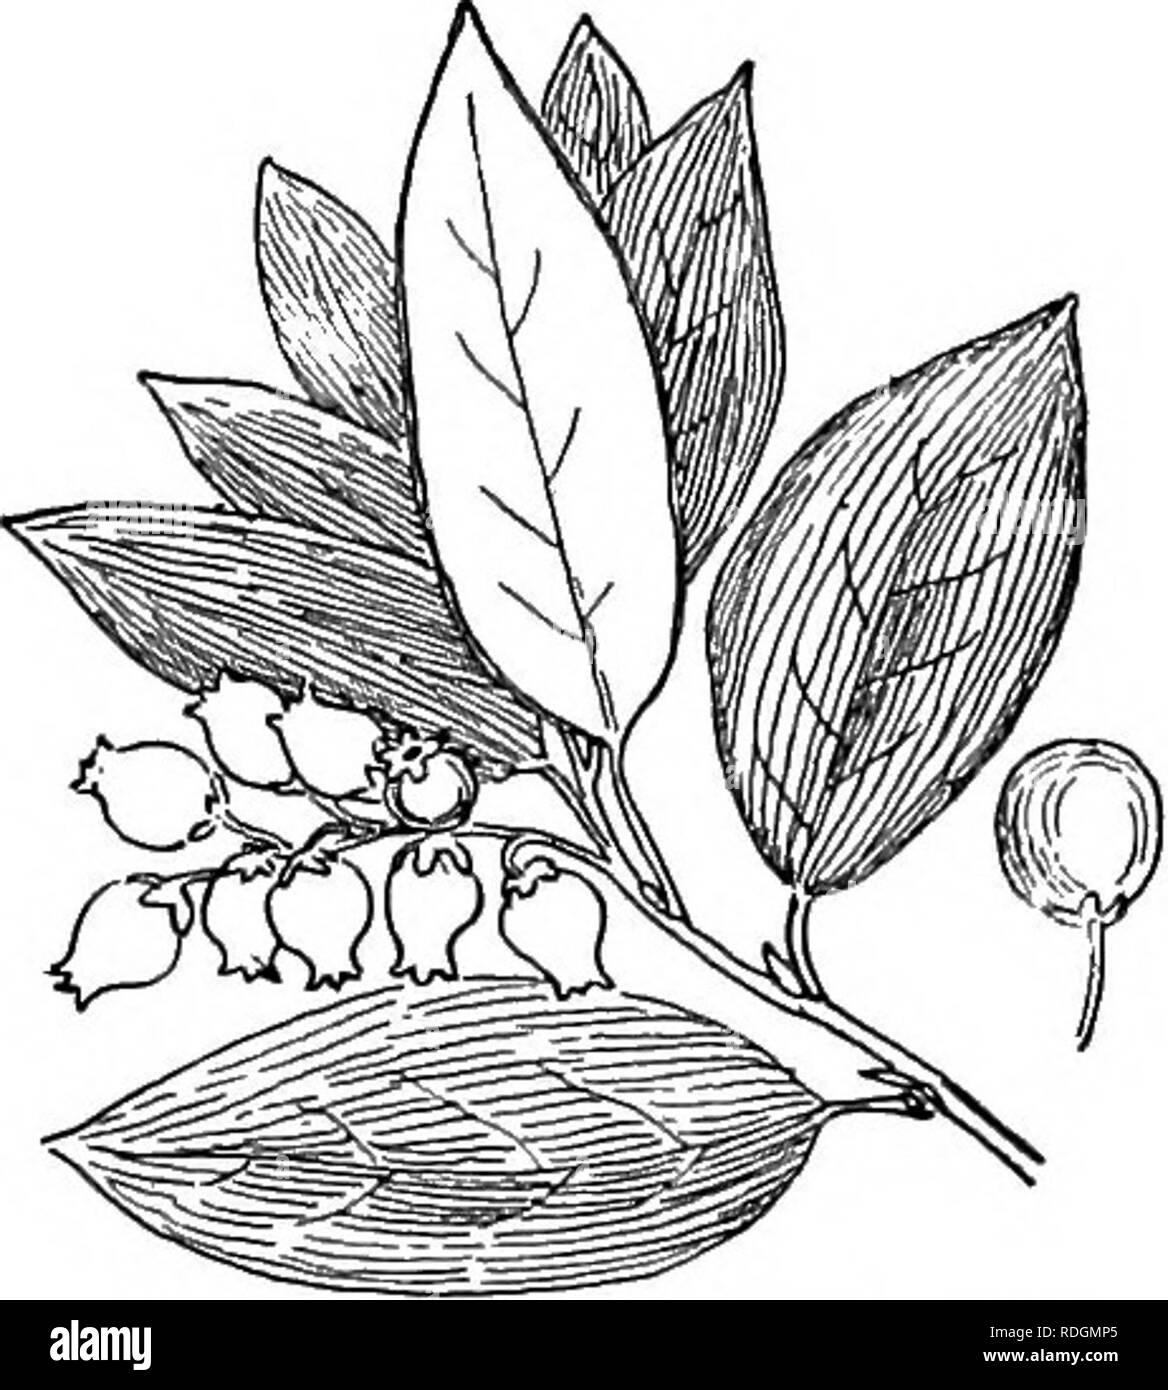 . Ornamental shrubs of the United States (hardy, cultivated). Shrubs. Fio. 414. — Pringle's Arcto- staphylos. Fig. 415. — Bicolored Aroto- staphylos. KEY OF FORMS OF AECTOSTAPHYLOS FROM THE PACIFIC REGION HARDY ONLY SOUTH * Leaves smooth and fruit on smooth stems. (A.) A. Flowers in umbel-like clusters ; shrub 3-10 feet. Downy Arc- TOSTAPHTLOs (410) — Arofostaphylos piingens. A. Flowers in elongated clusters; shrub or tree to 30 feet. Man- zANiTA (411) — Arctostaphylos Manzanita. * Leaves smooth ; fruit stems glandular. (B.) B. Flowers in elongated clusters; shrub or tree 8-25 feet. Pale- leav Stock Photo